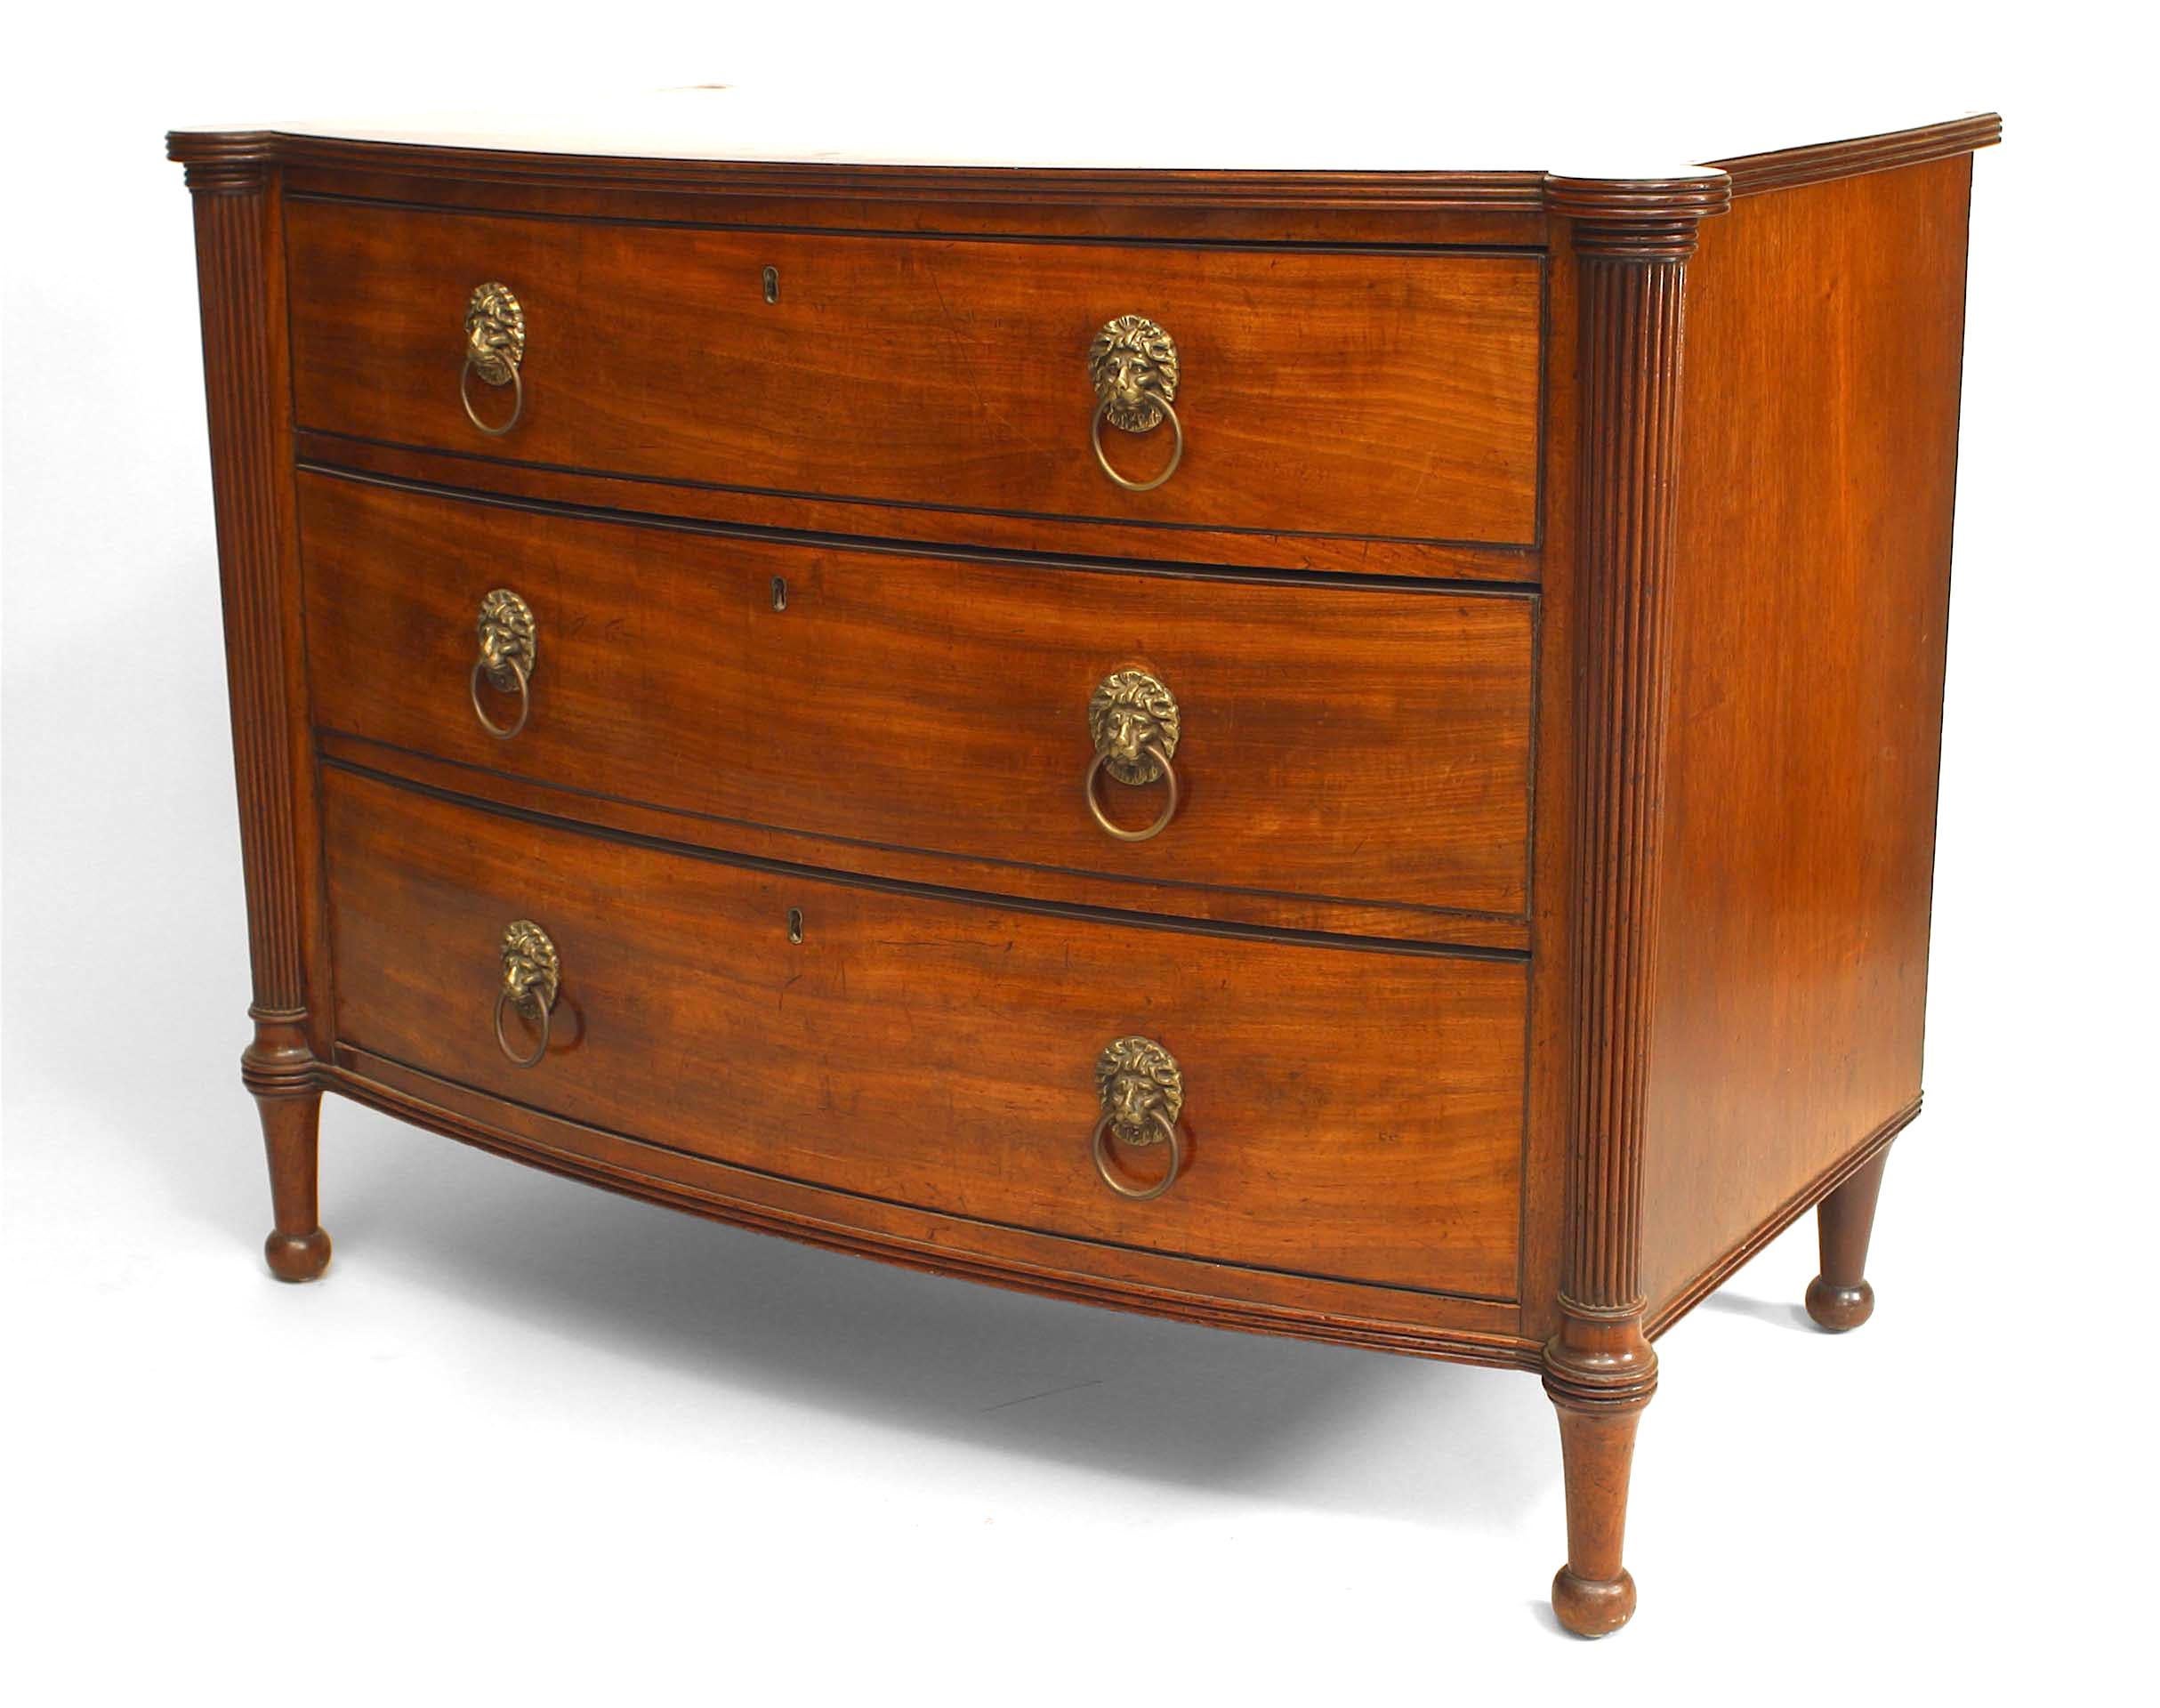 English Late George III (circa 1800) mahogany bow fronted chest of drawers with 3 long drawers with lion mask pulls & flanked by reeded outset angles.
